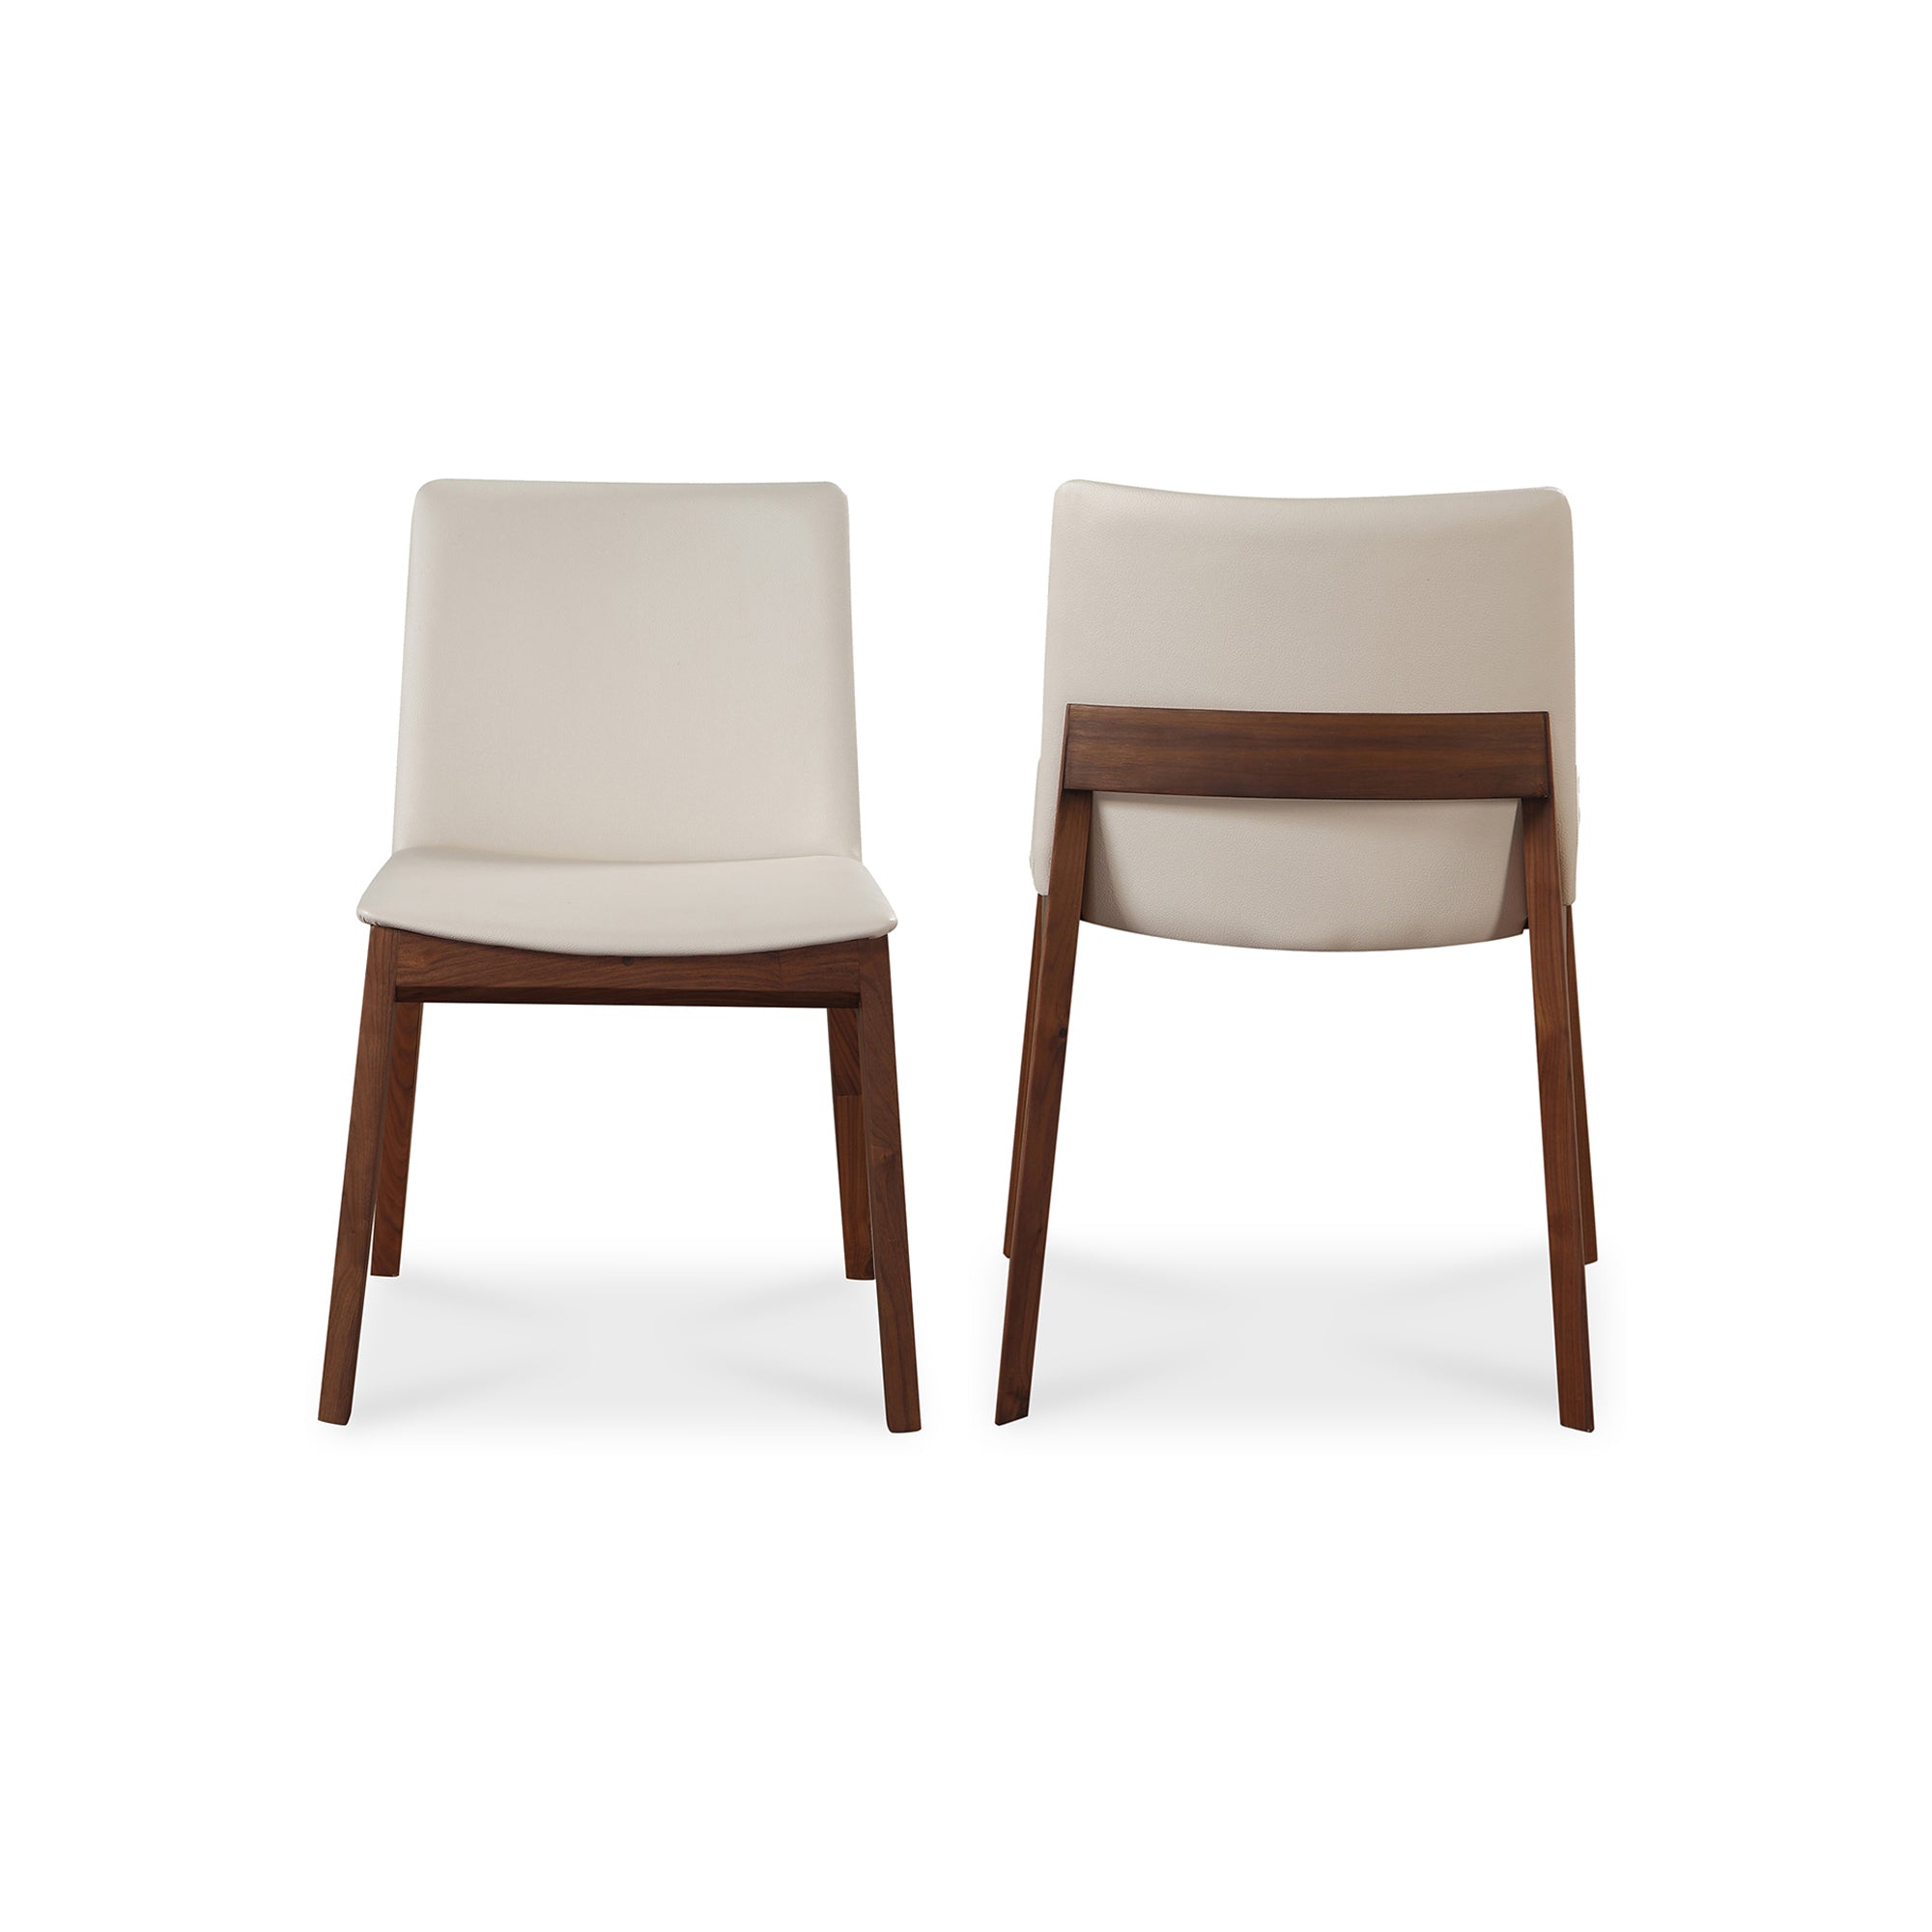 Deco Dining Chair Cream White PVC - Set Of Two